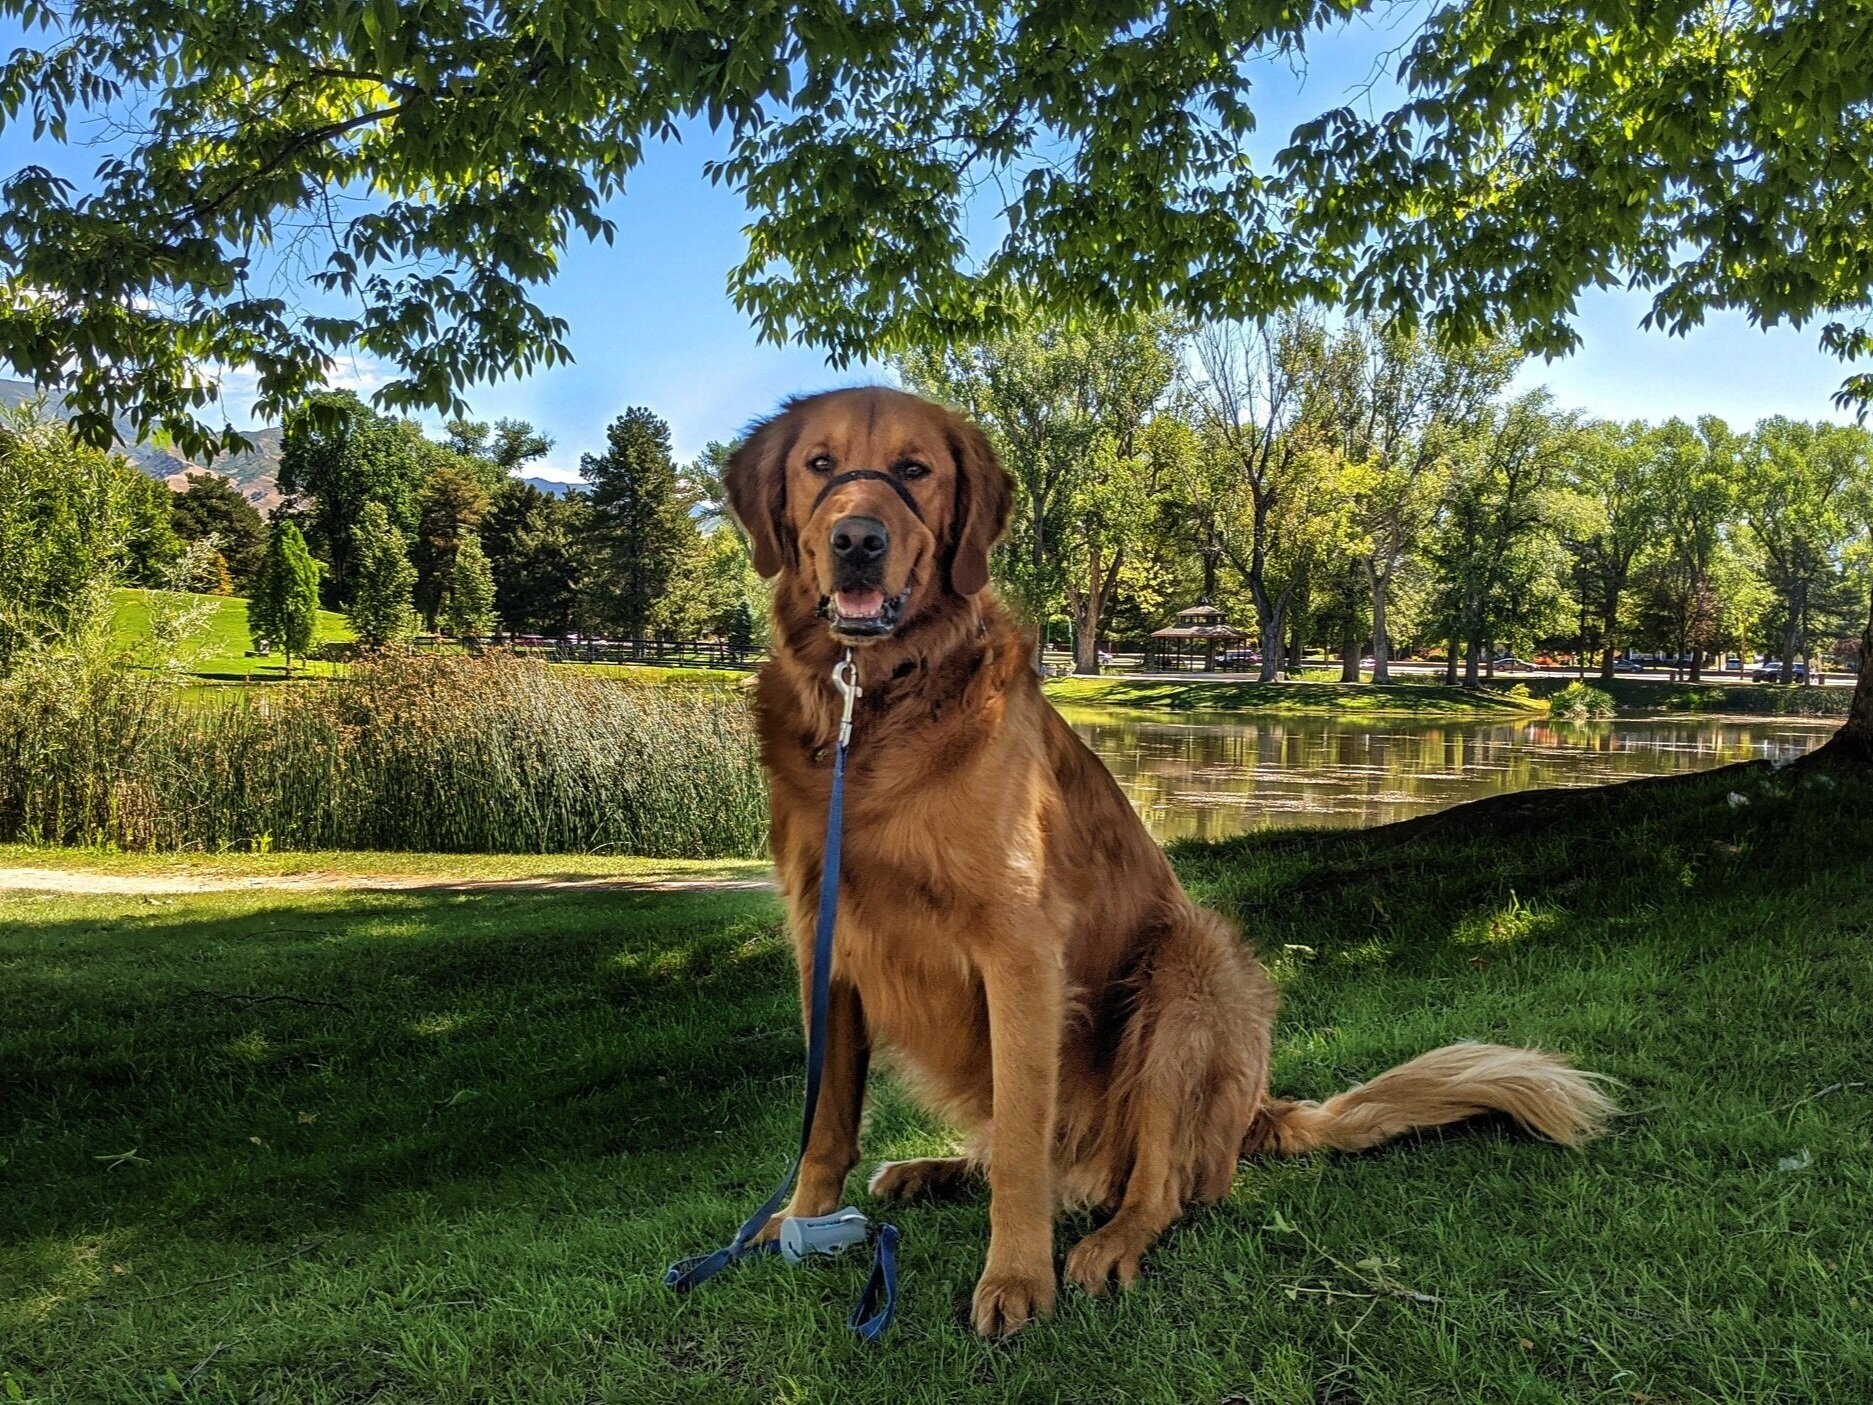 Golden retriever Scout sits on a grassy hill overlooking a pond at Liberty Park